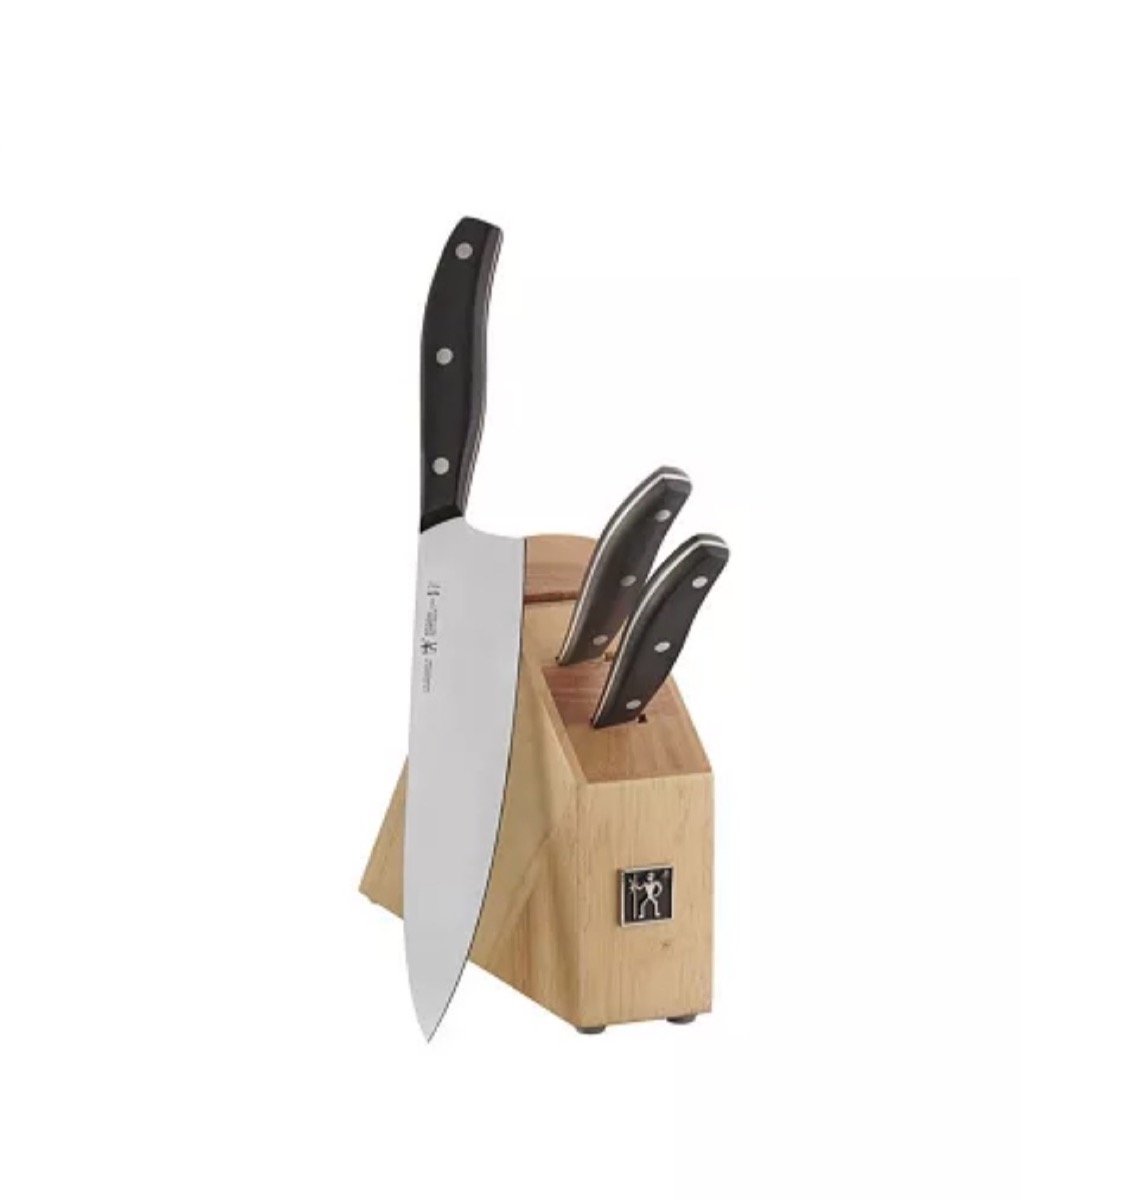 butcher block with two knives in it and large chef's knife with black handle next to it